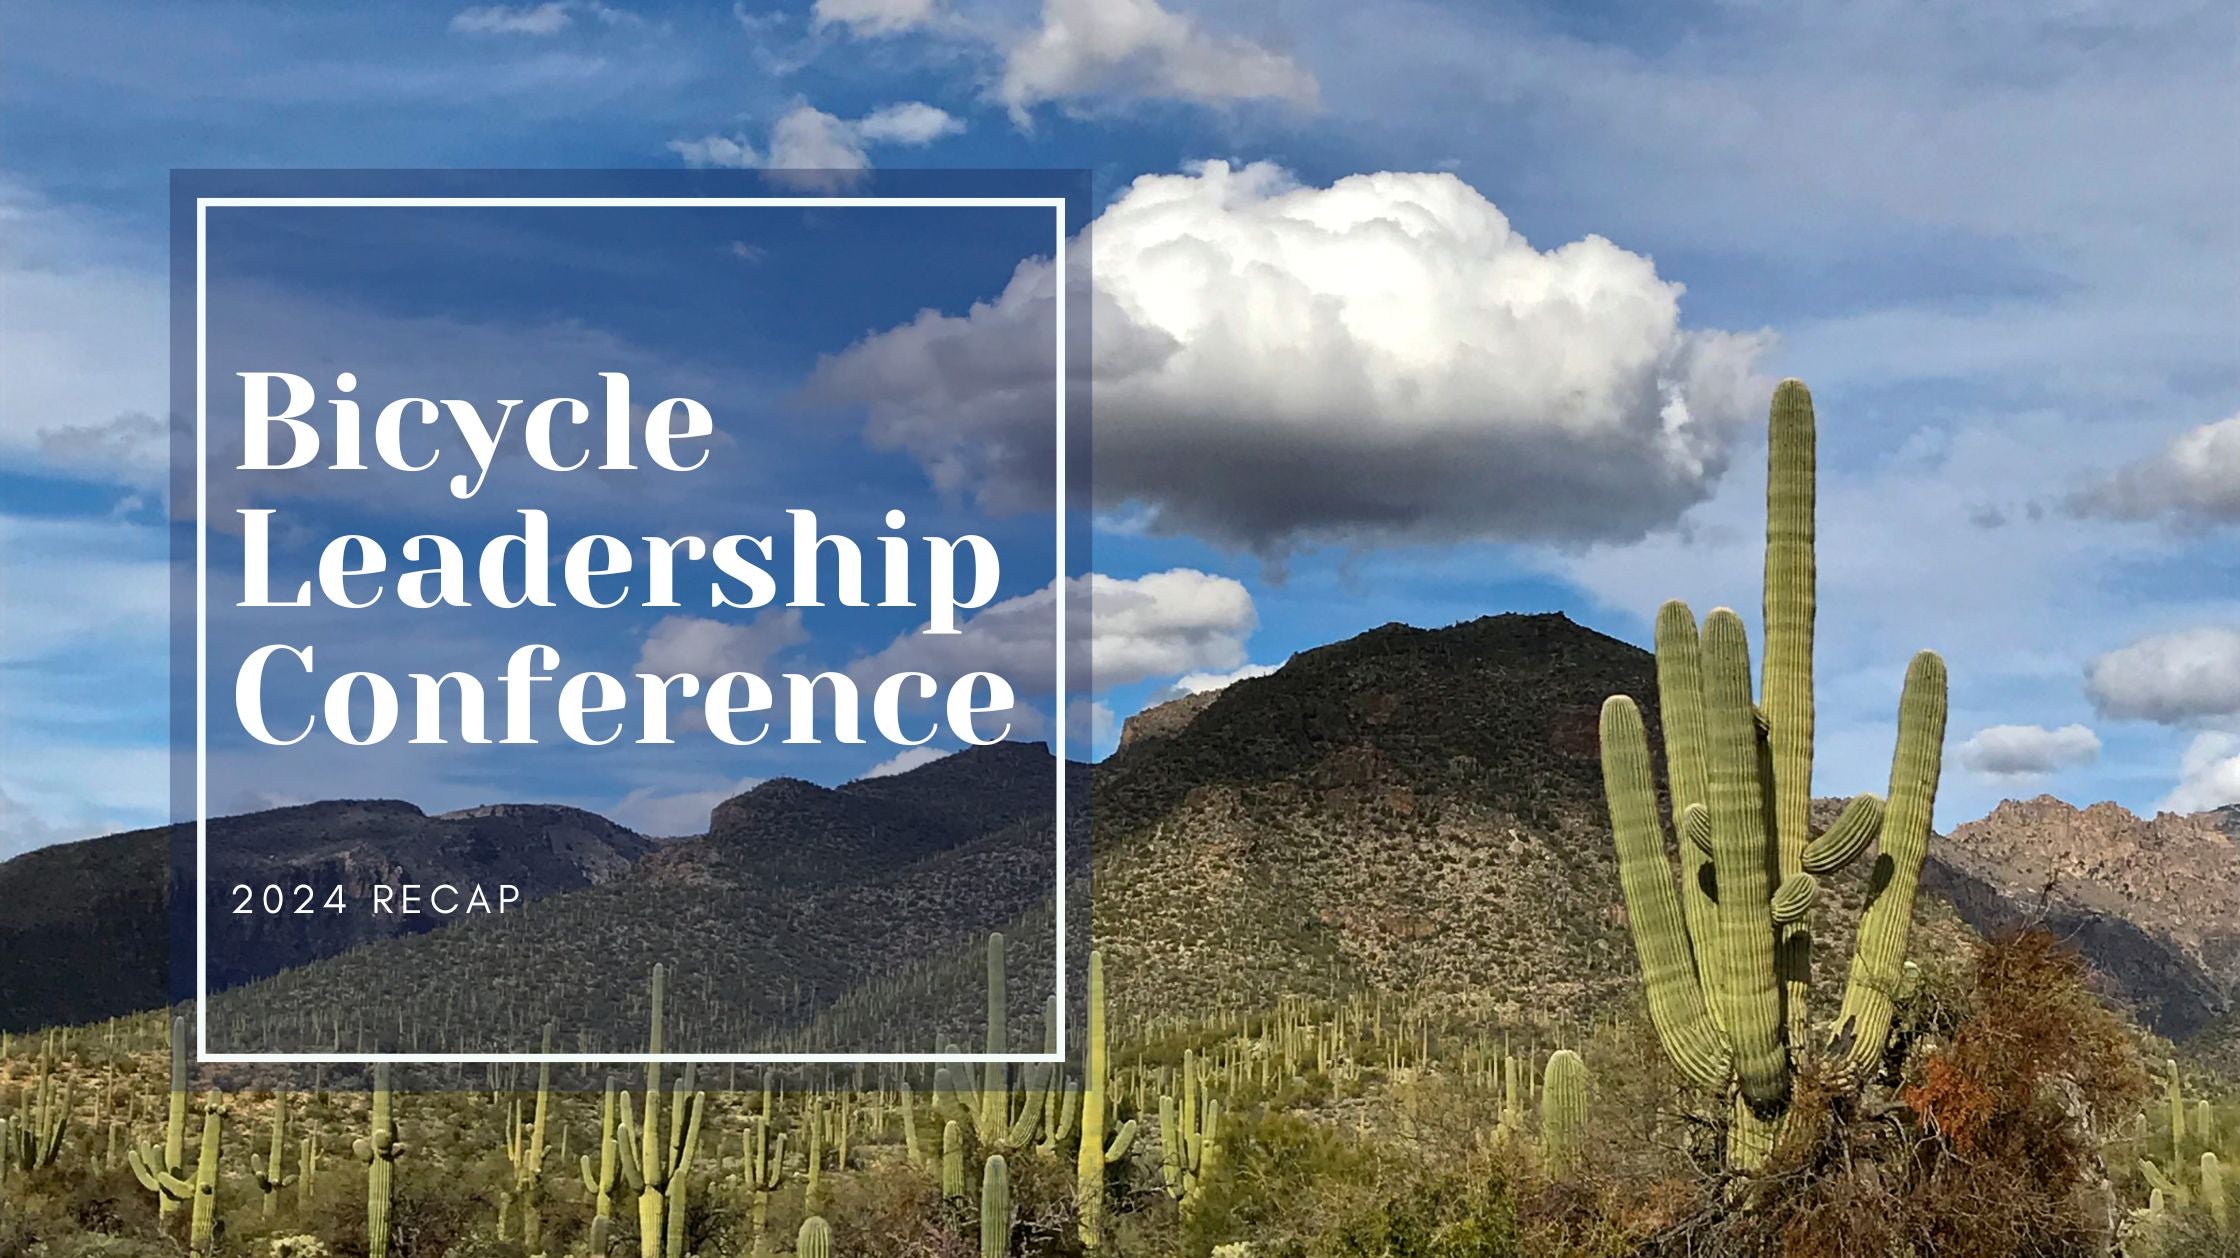 The Bicycle Leadership Conference 2024 in Tucson AZ